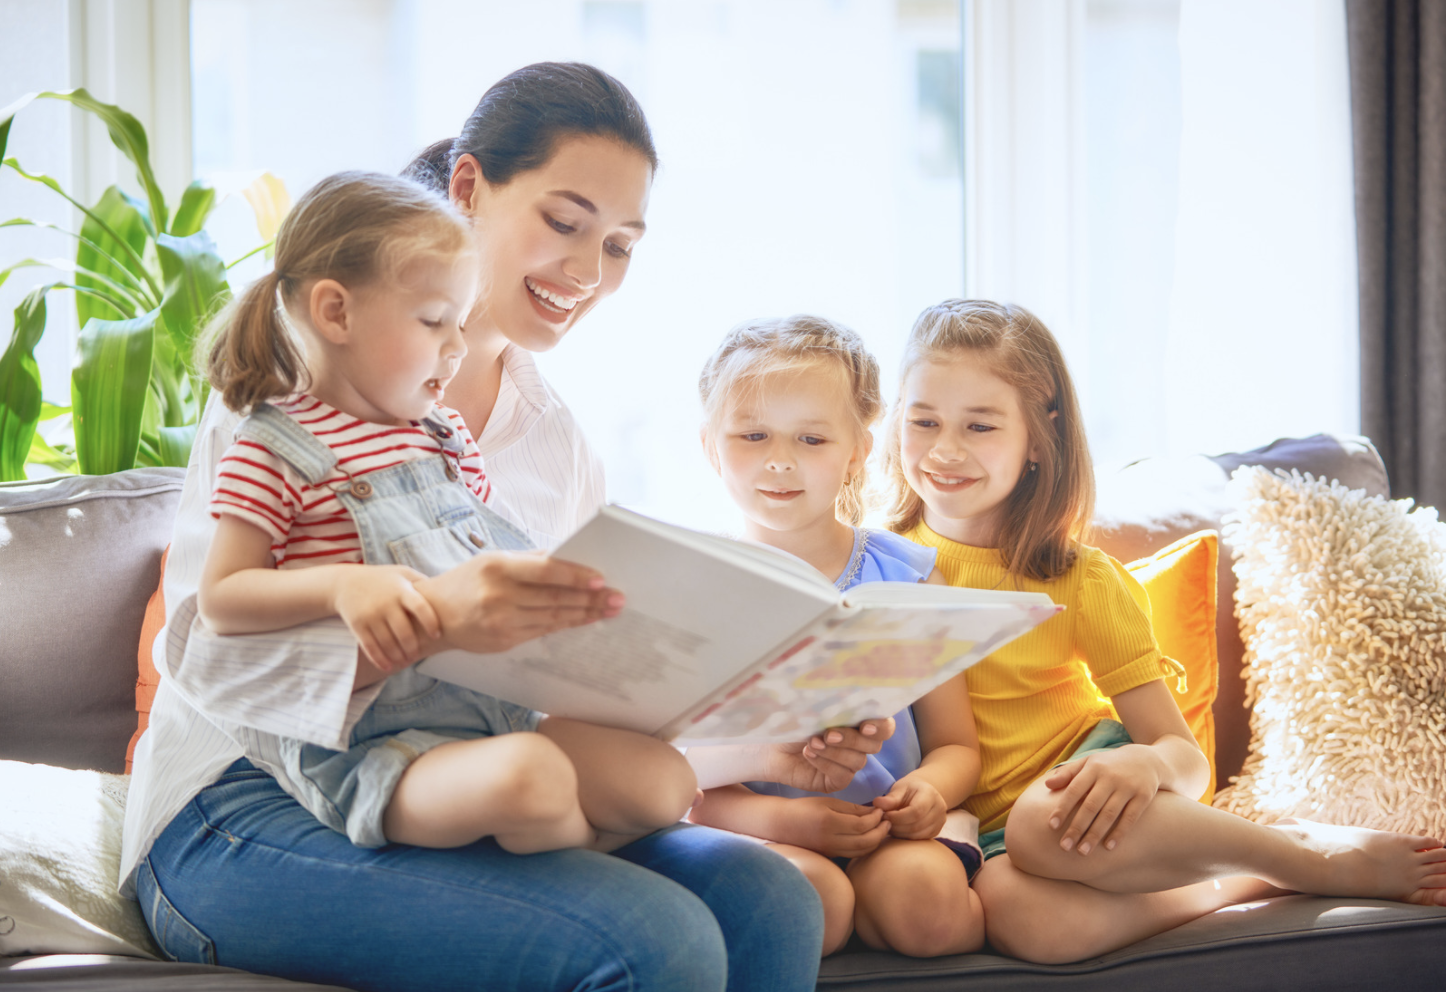 Read with your kids if you're stuck at home while on the COVID-19 crisis